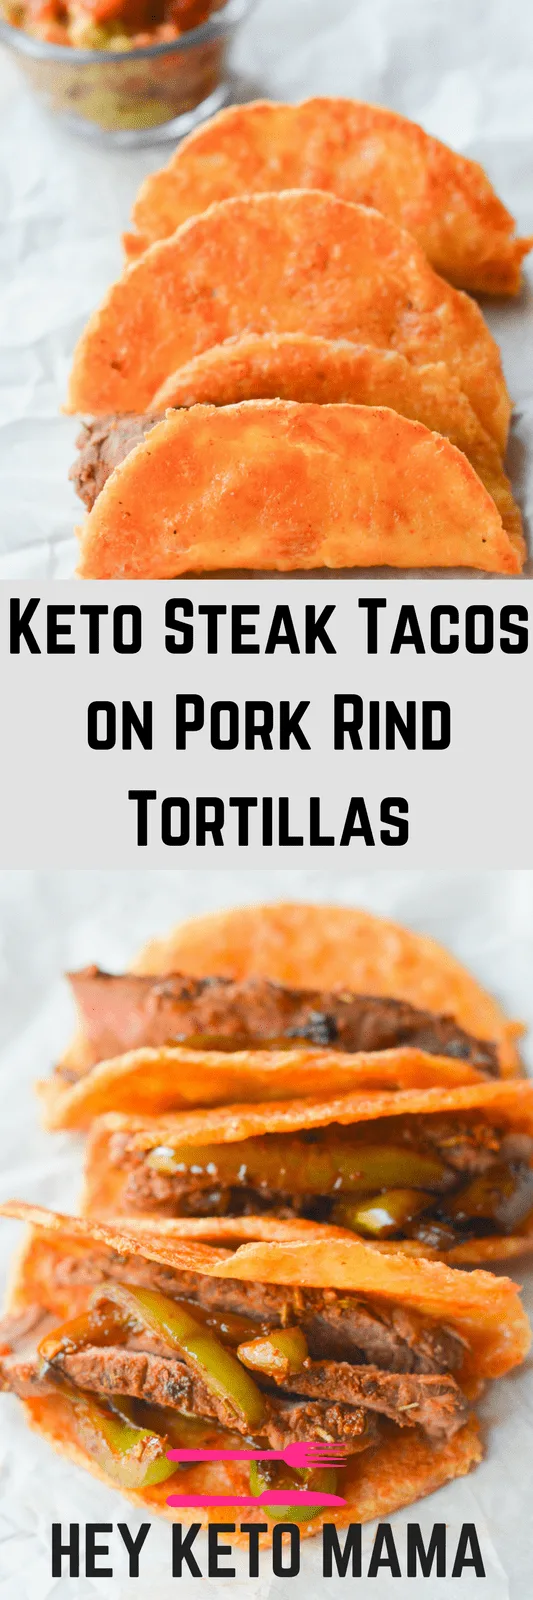 The best part about these Keto Steak Tacos on Pork Rind Tortillas is they are extremely low carb. With so few ingredients, they are sure to become a fast favorite! | heyketomama.com